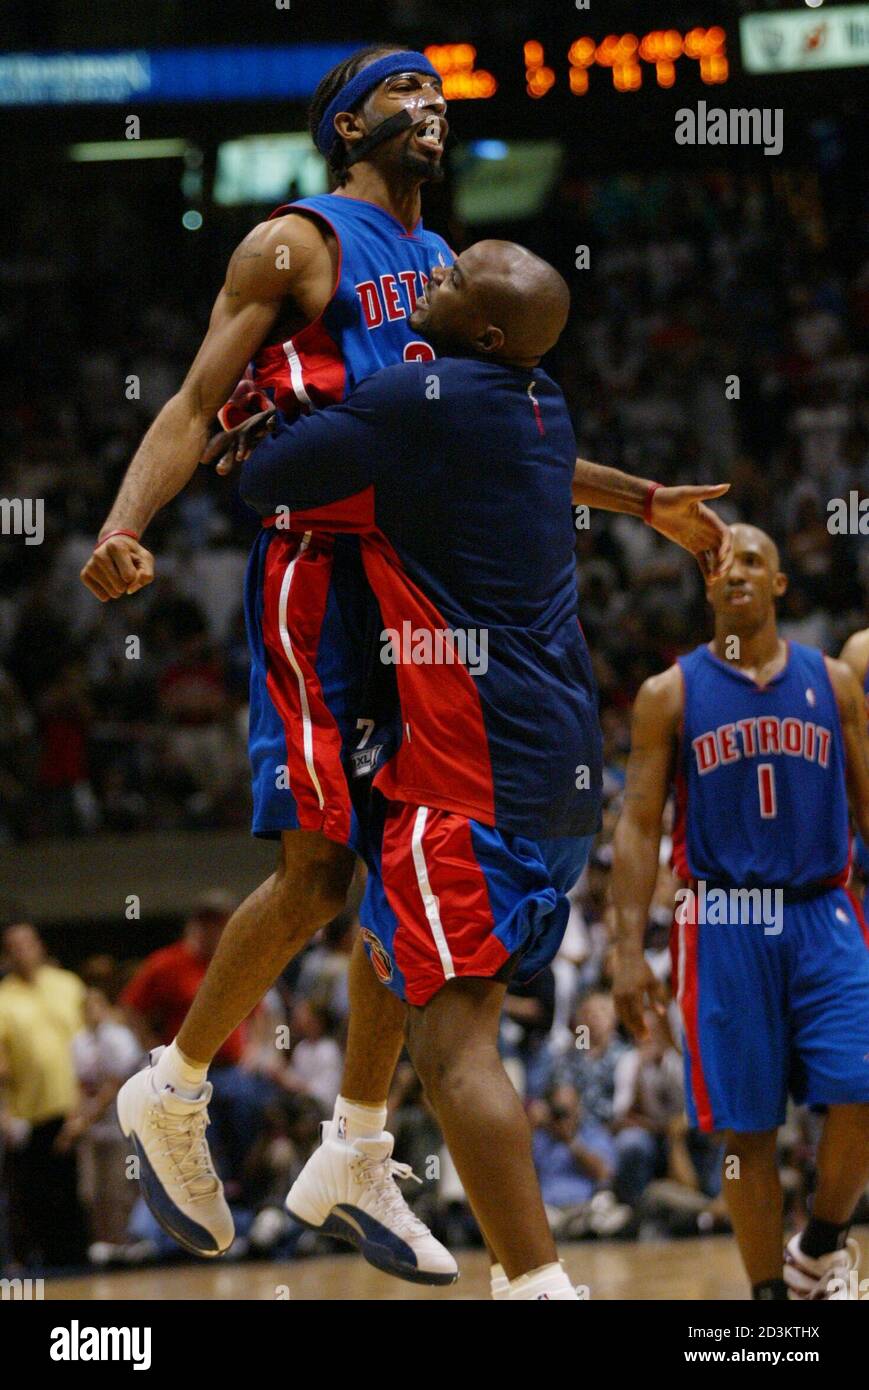 Detroit Pistons guard Richard Hamilton (L) is lifted by his teammate Mike  James after Hamilton made a basket late in the fourth quarter of the  Pistons' 81-75 win over the New Jersey